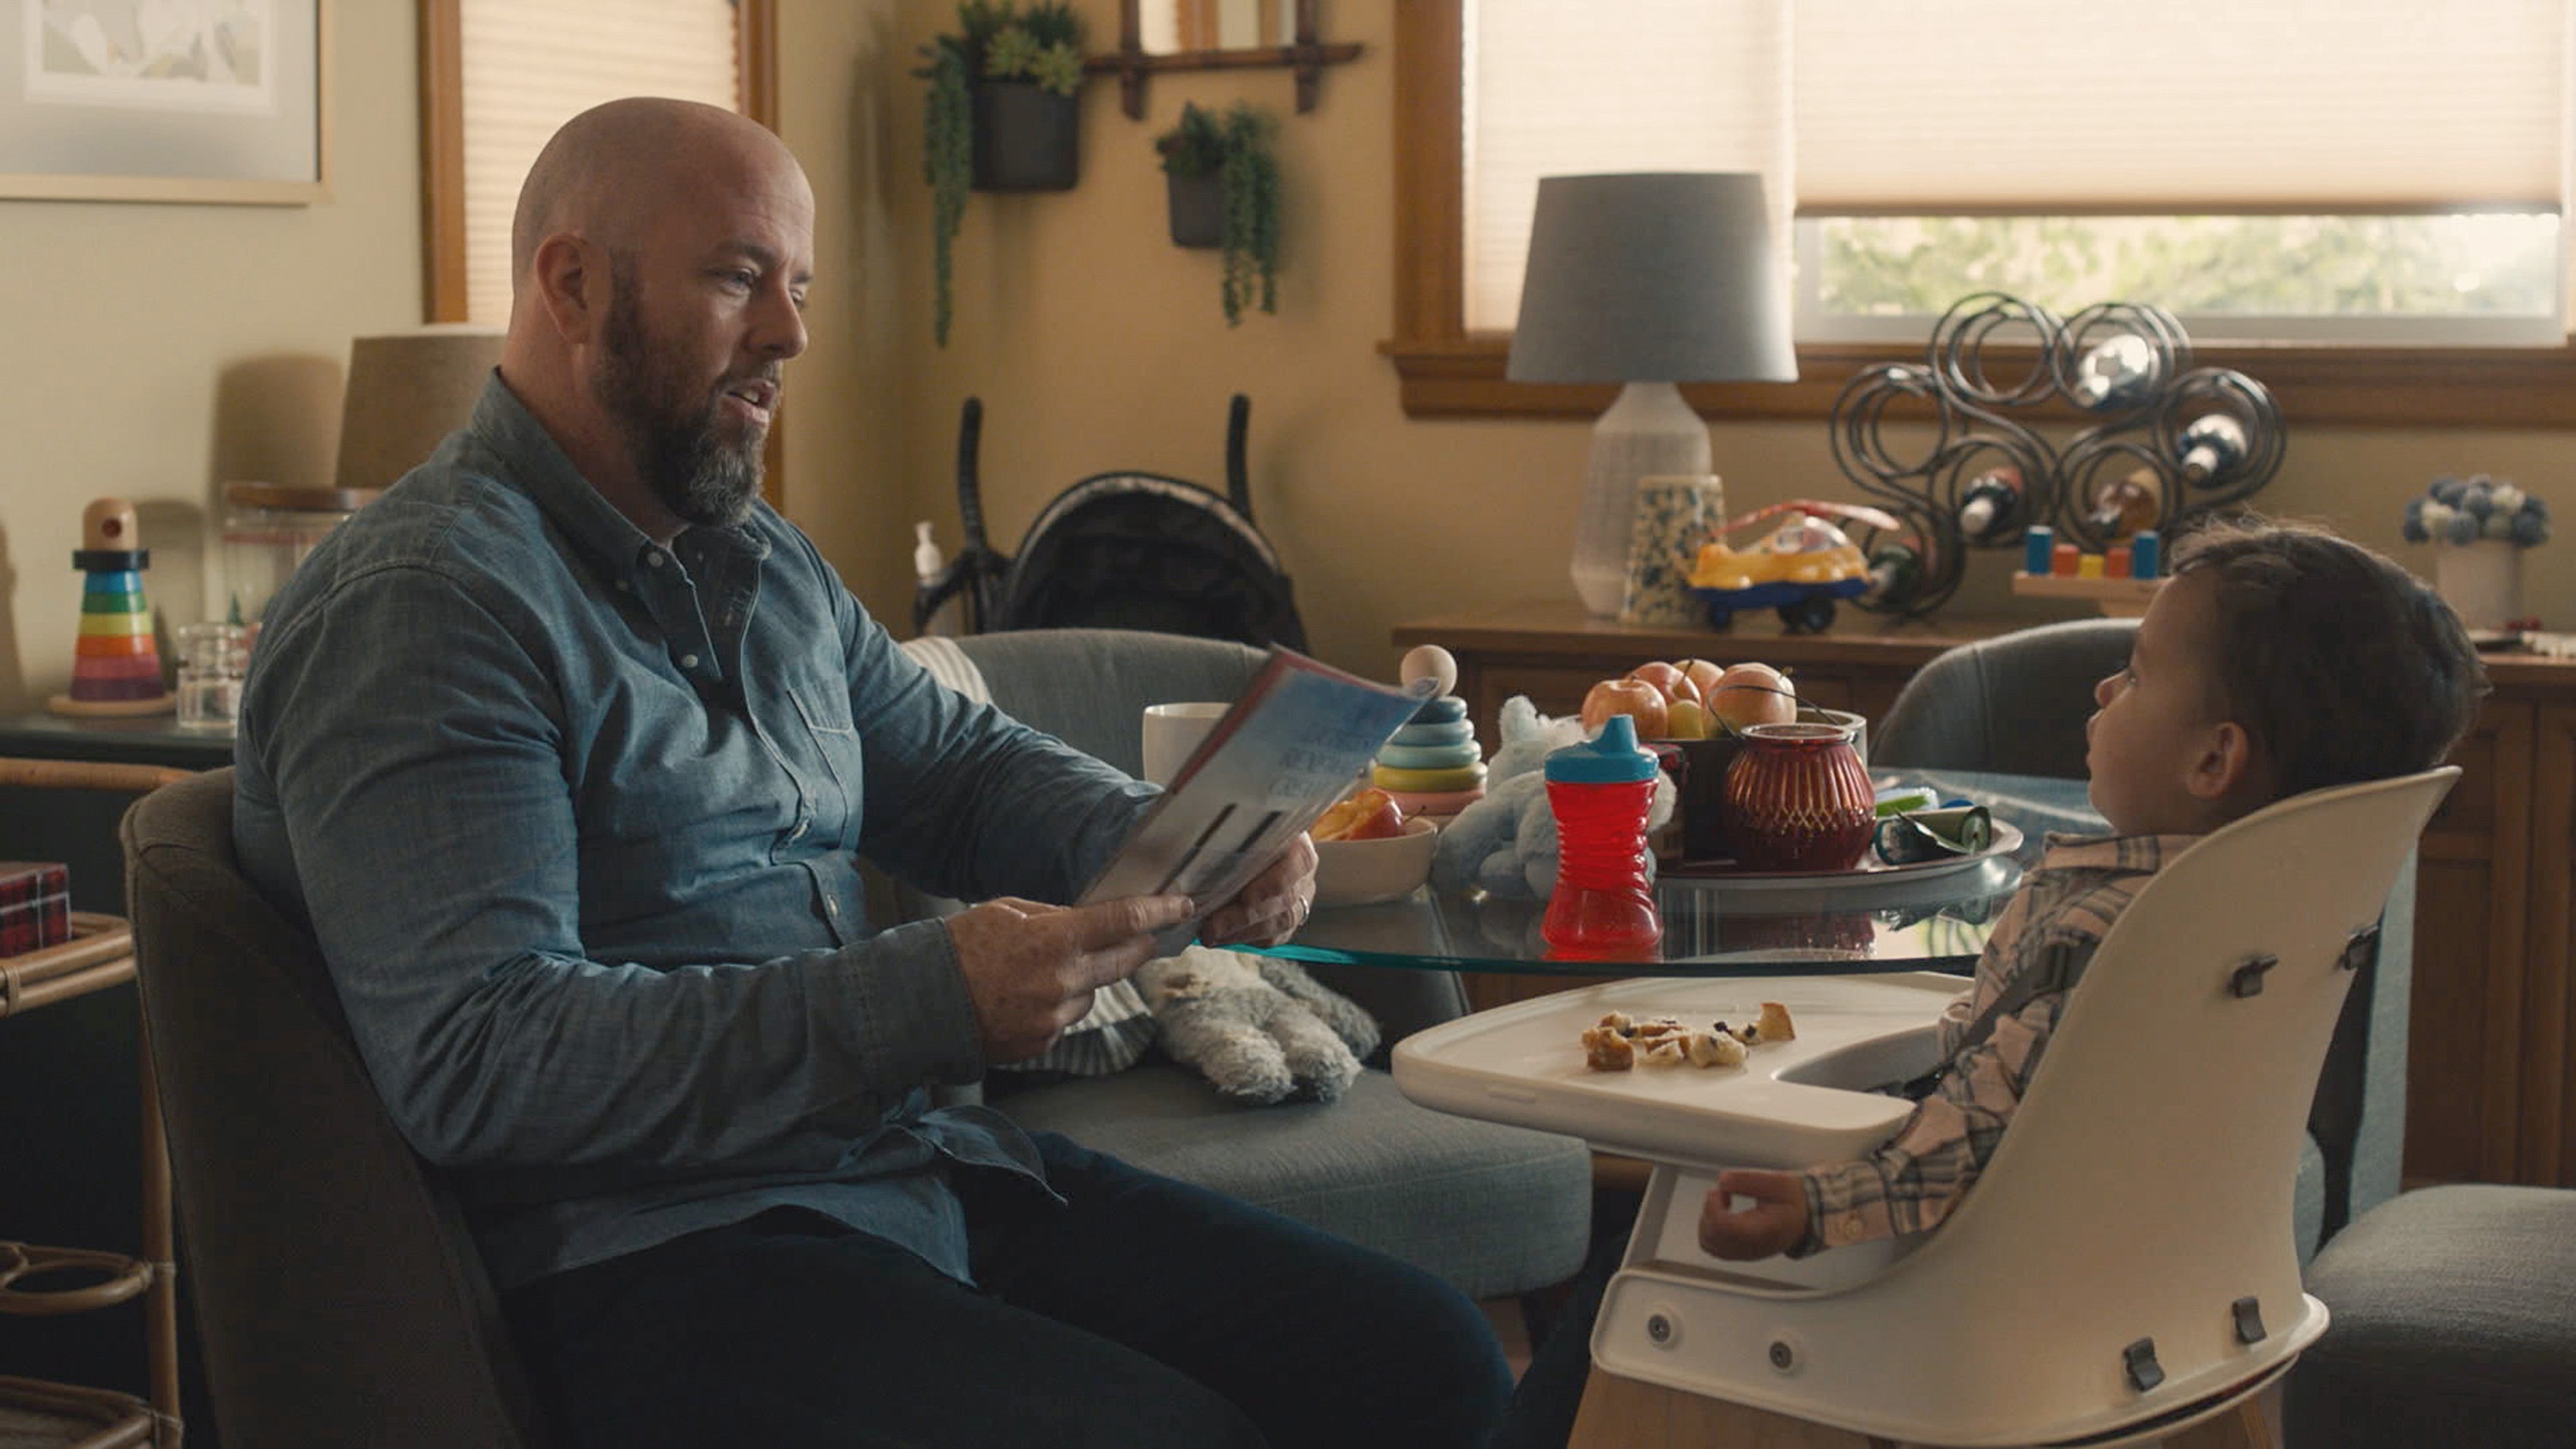 This Is Us Season 5 Episode 12 Both Things Can Be True with Chris Sullivan as Toby and Baby Jack